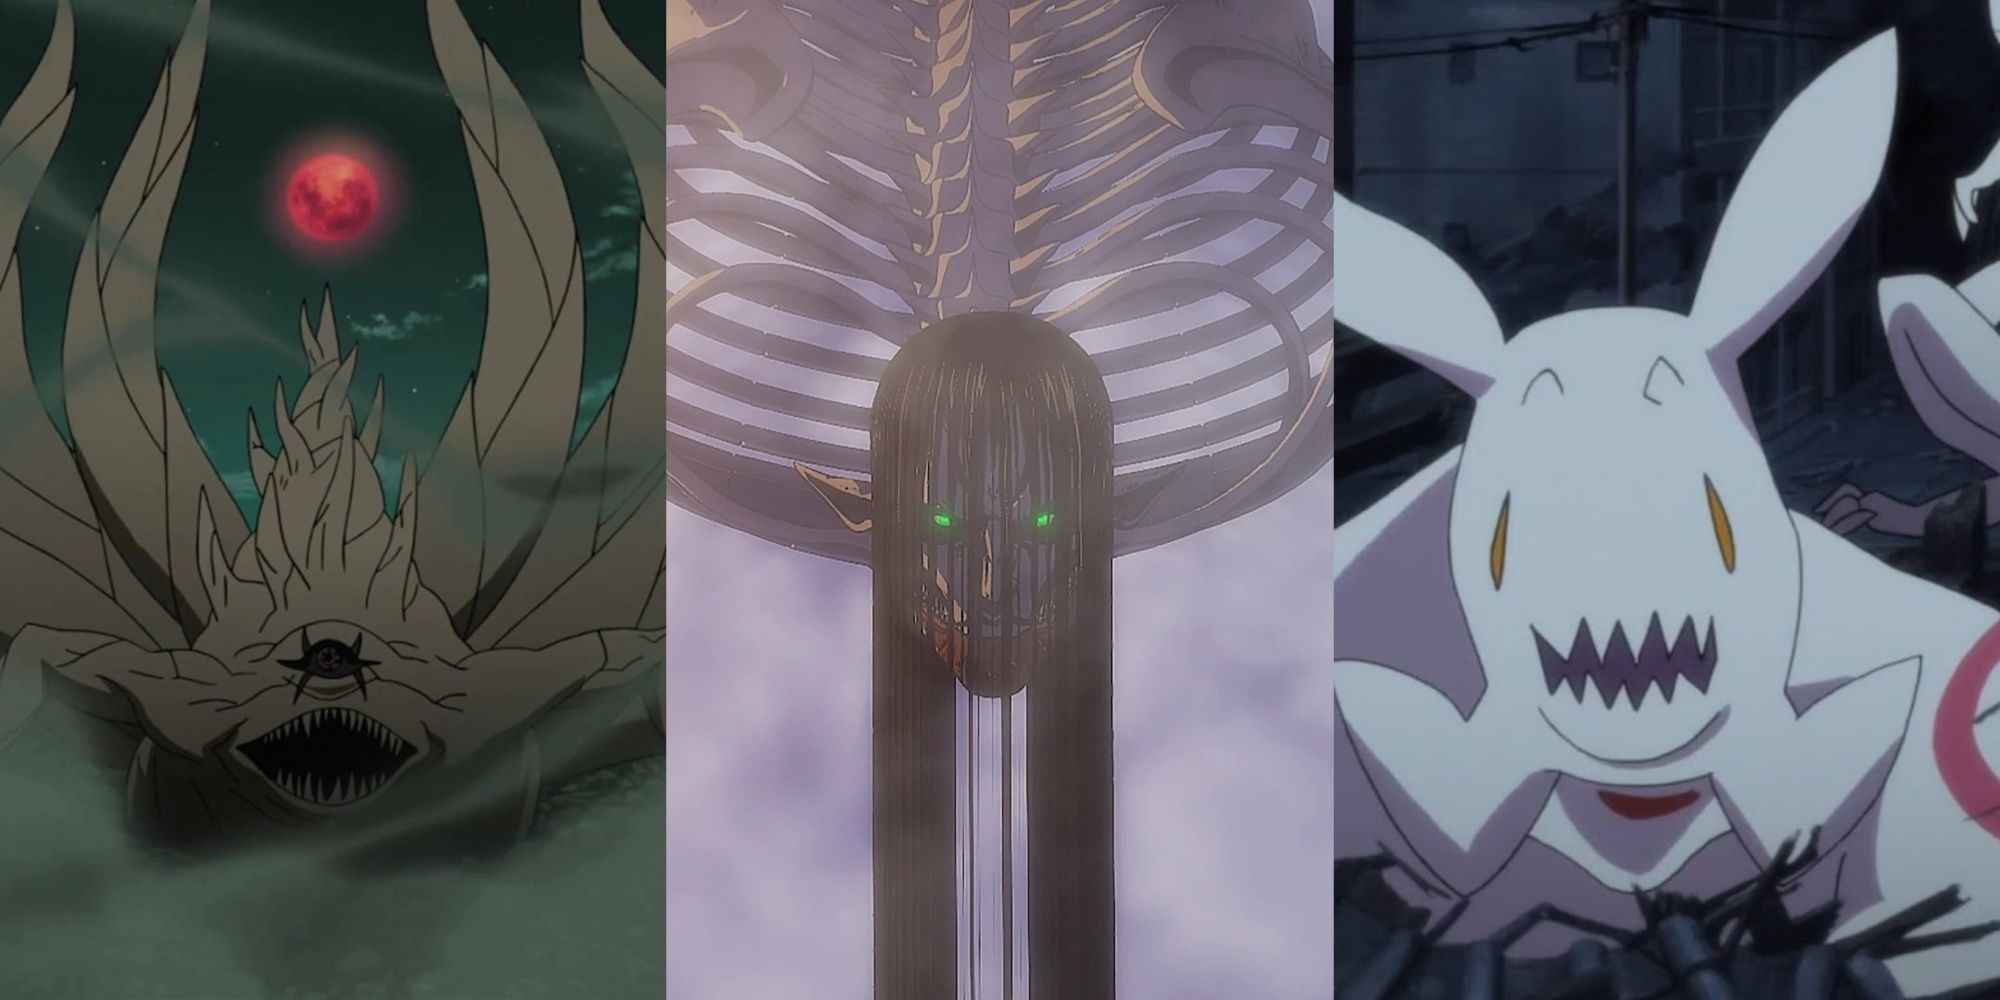 Anime Monsters That Are Absolutely Terrifying